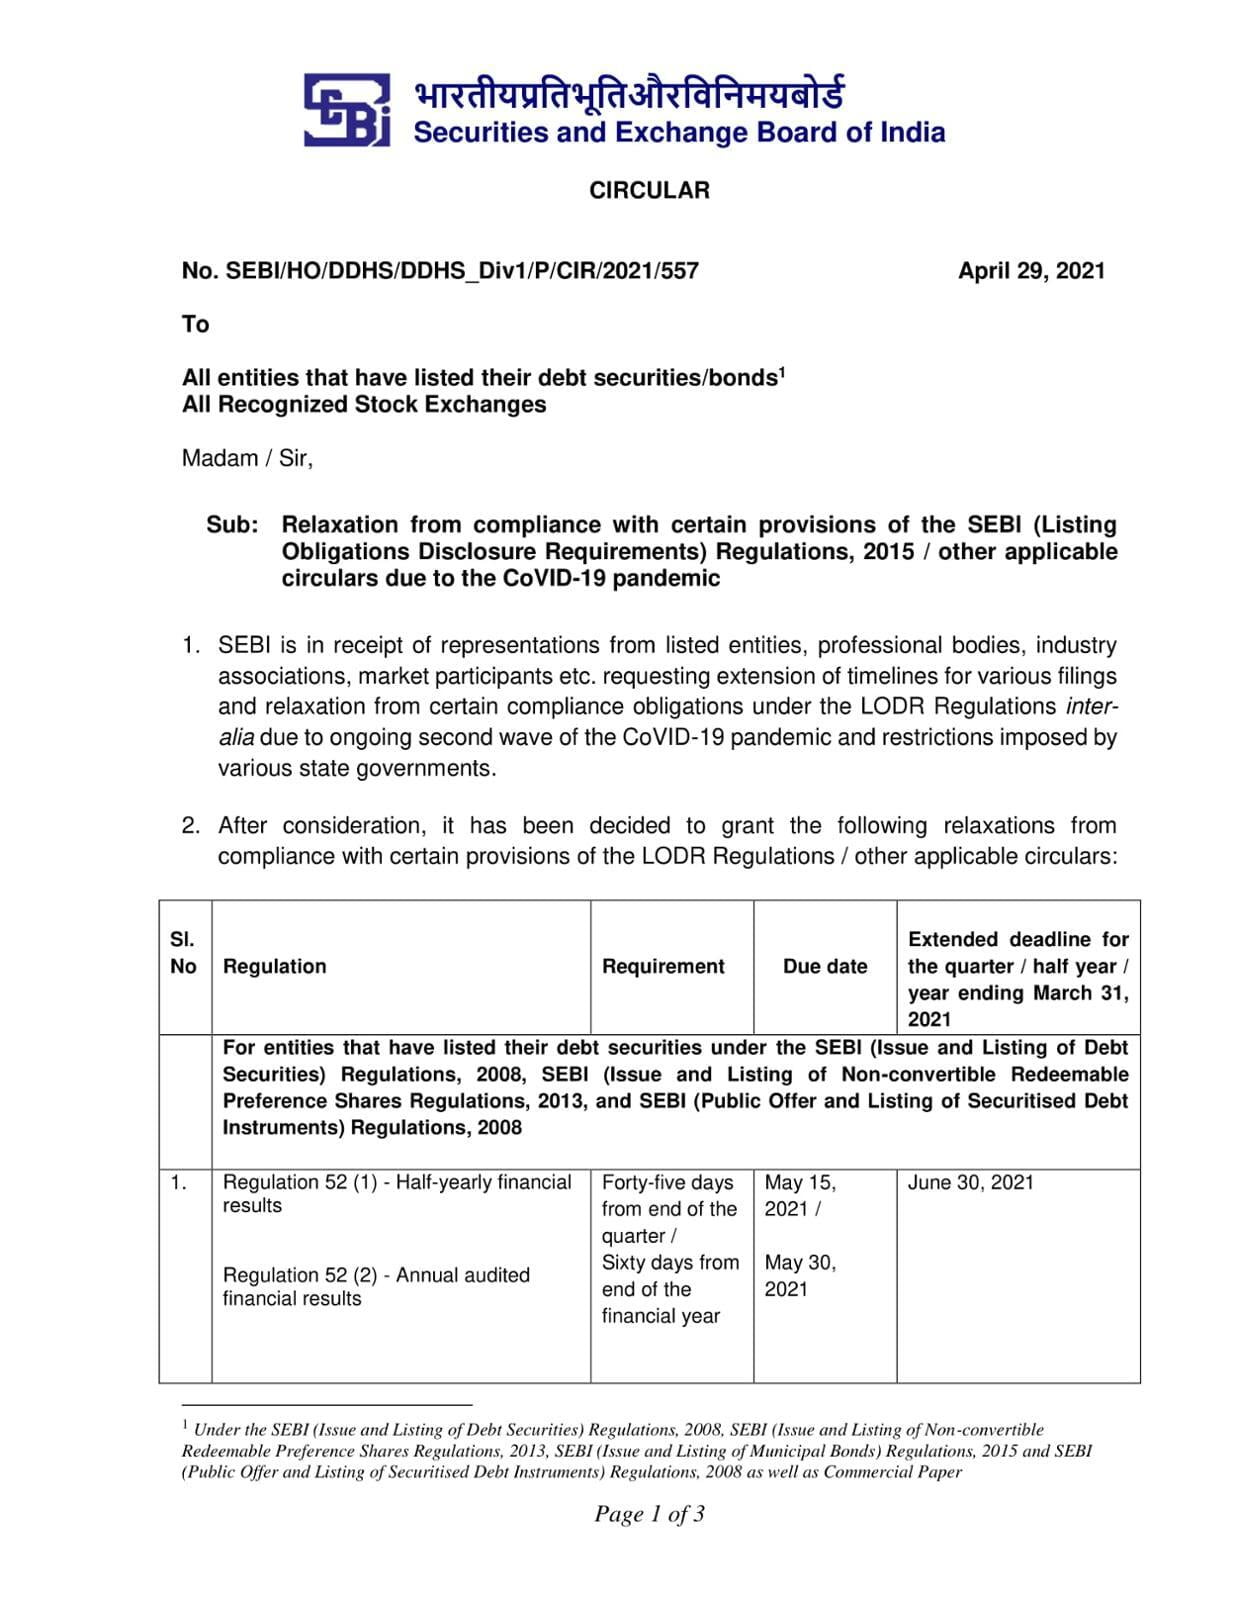 SEBI extends the timeline of submission of financial results for FY 2020-21 from 30th May, 2021 to 30th June, 2021 in view of the COVID Pandemic